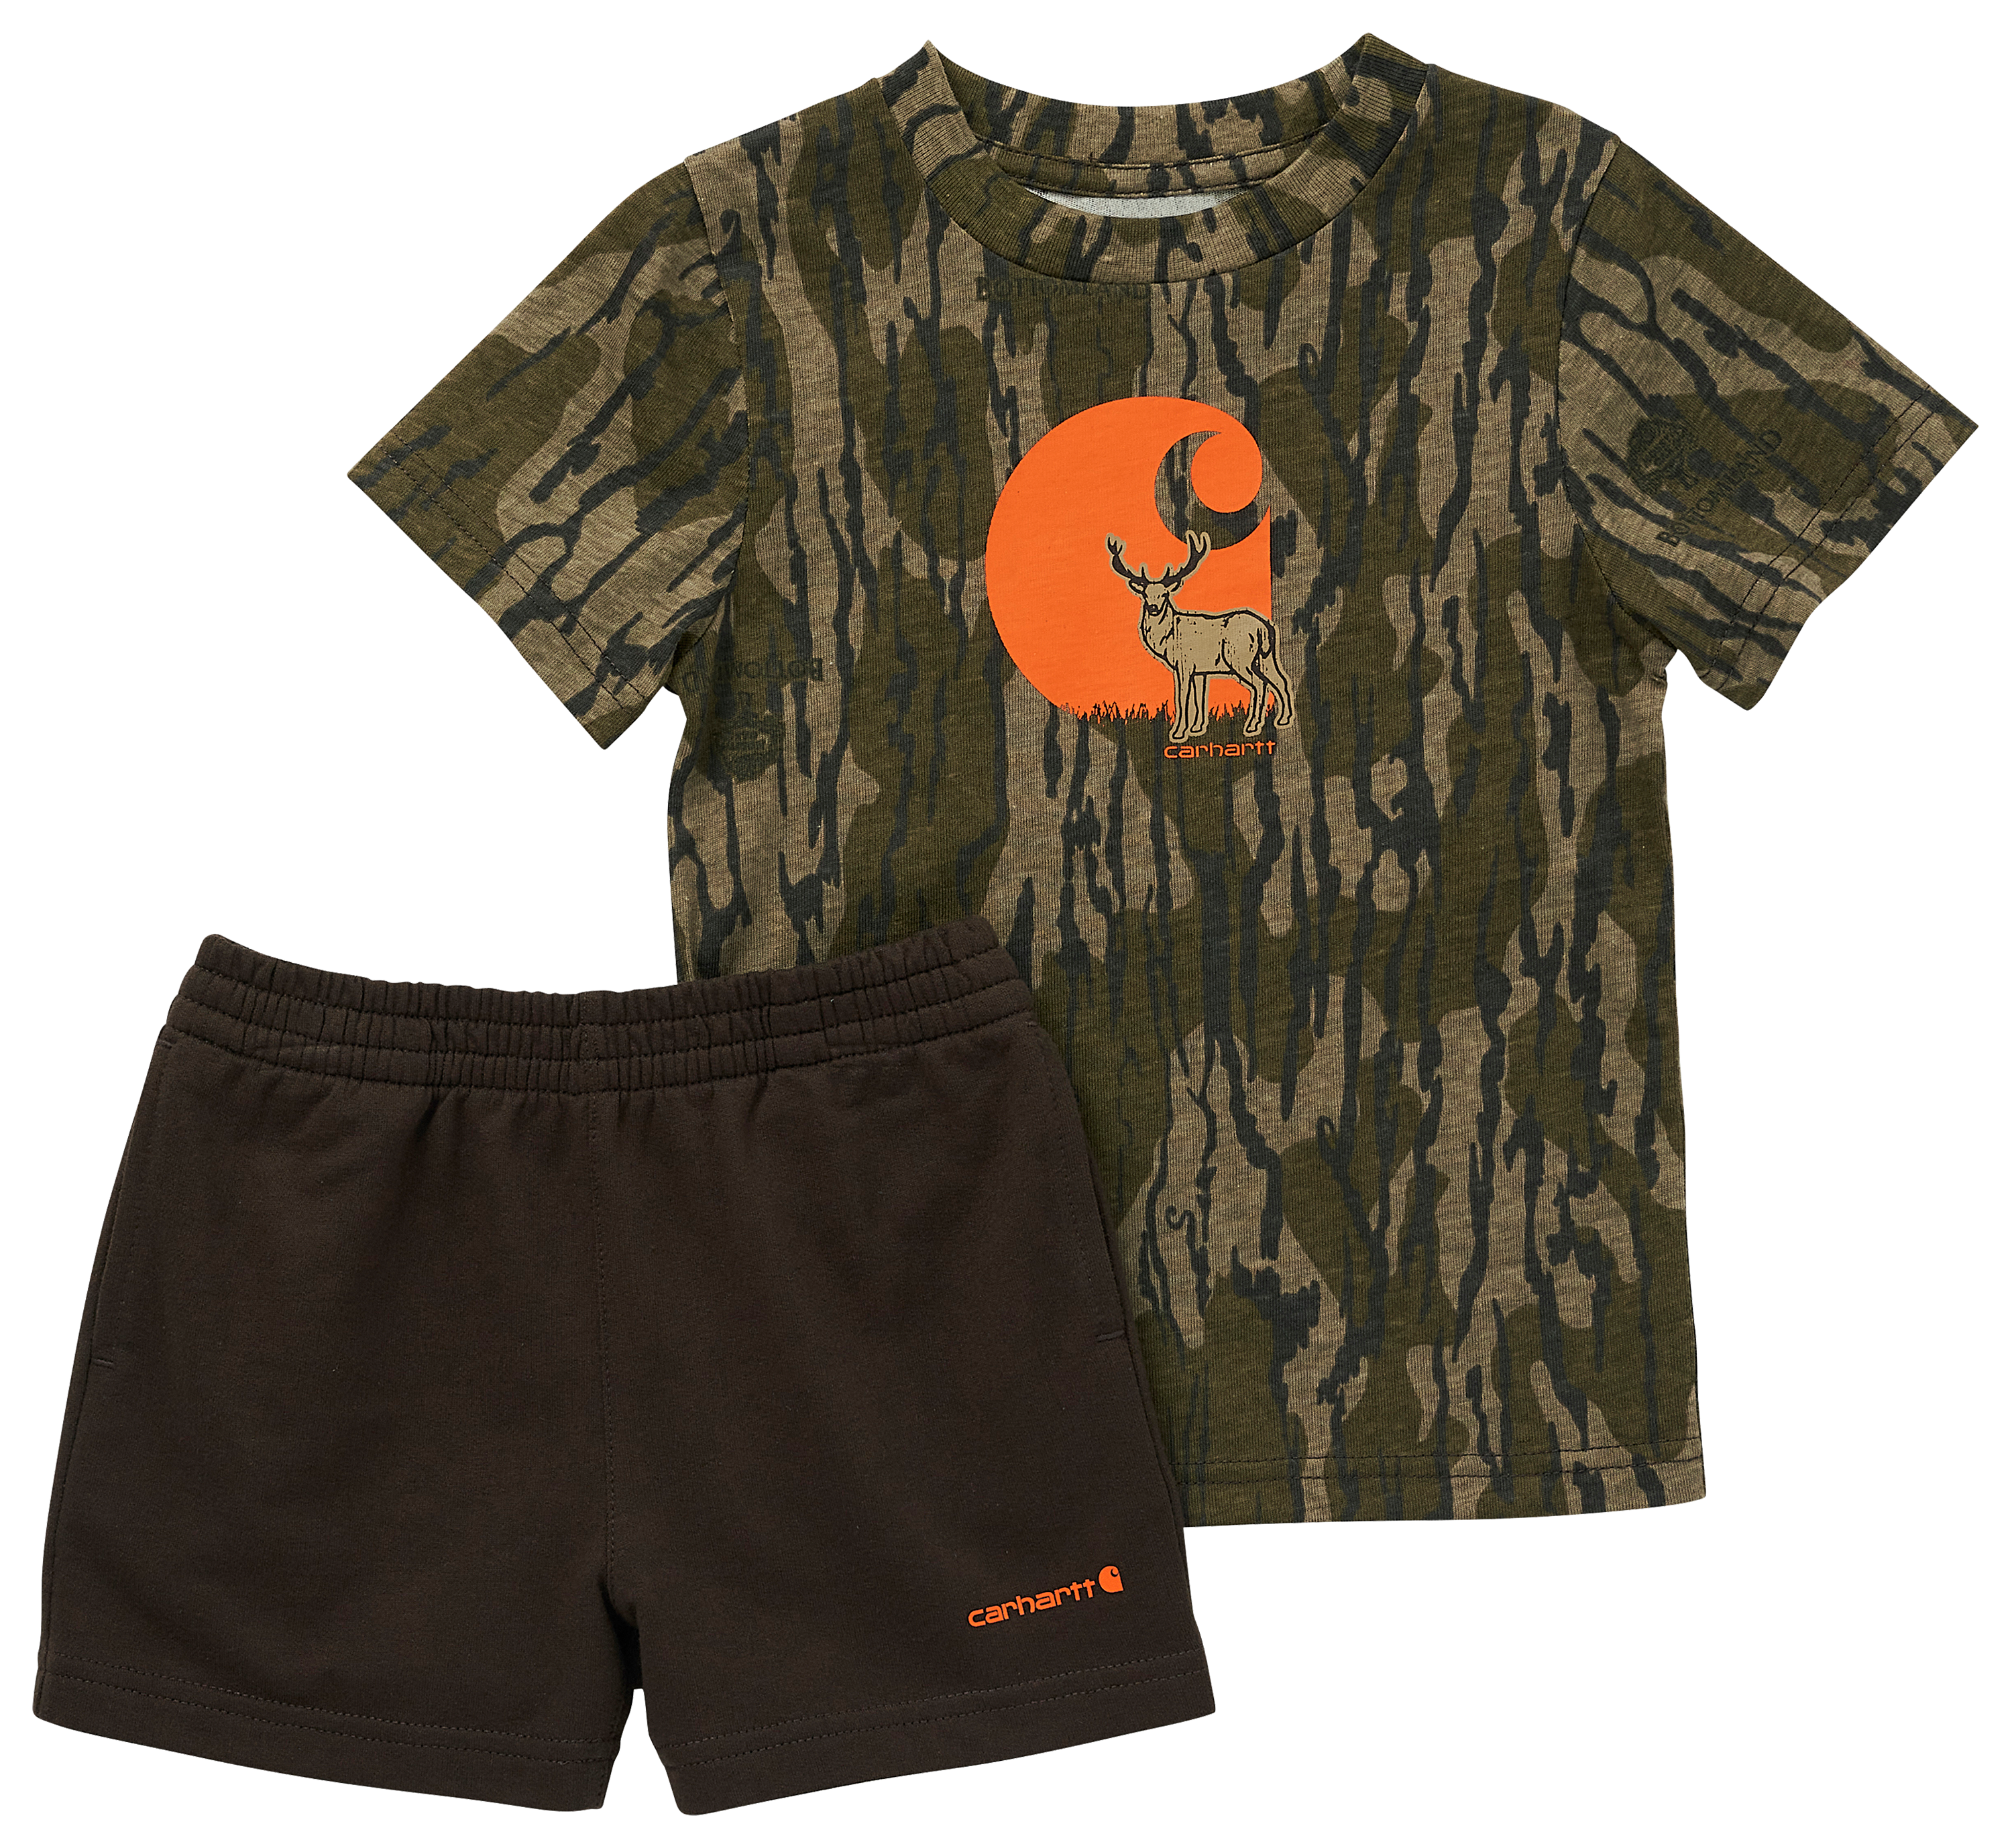 Carhartt Short-Sleeve T-Shirt and French Terry Shorts Set for Babies - Mossy Oak Original Bottomland - 9 Months